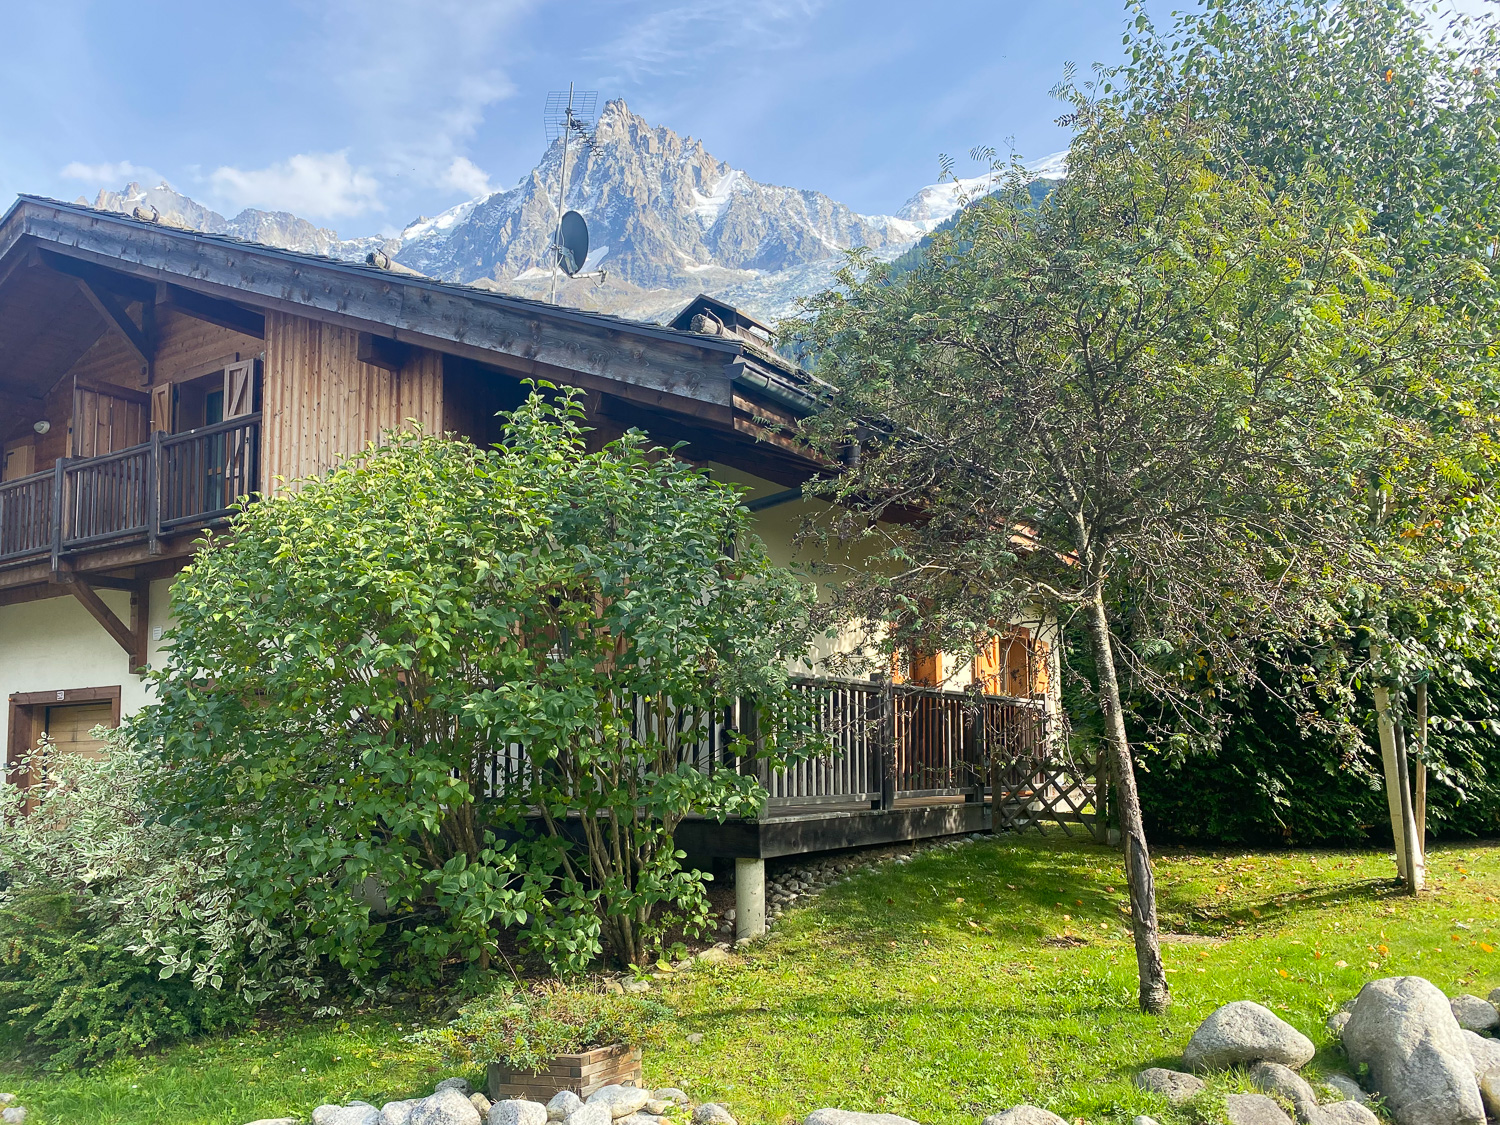 Semi-detached chalet in Chamonix in Les Bossons area